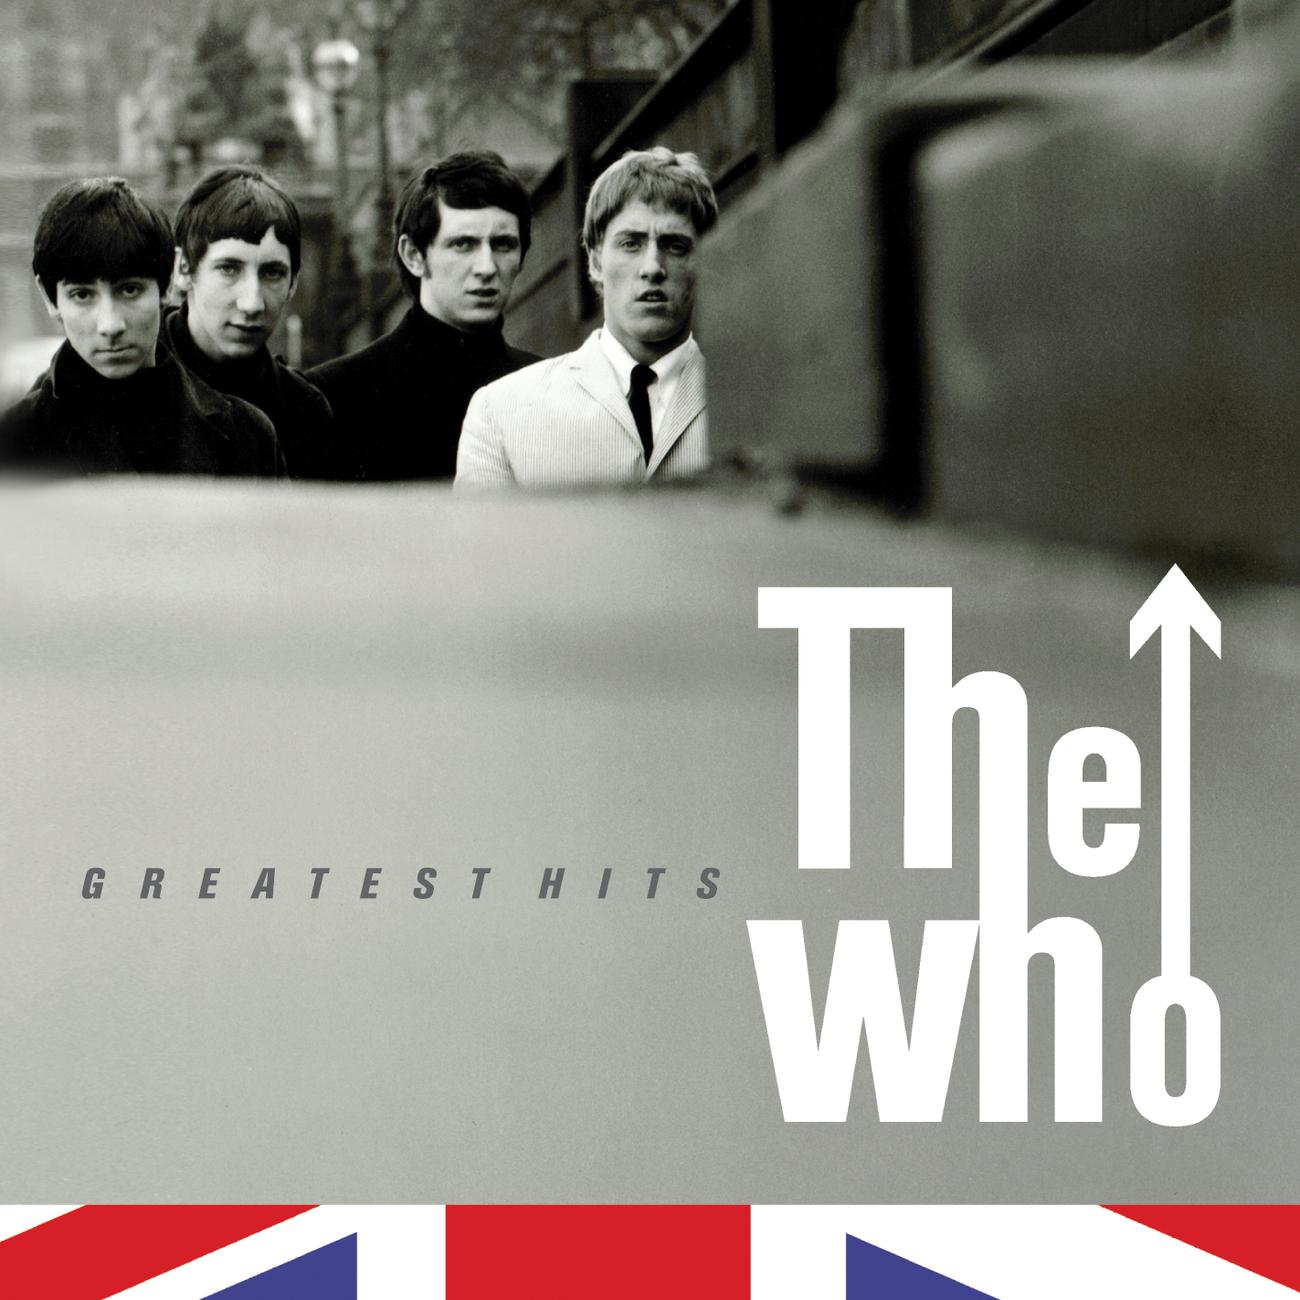 Albums the who. The who 1965. Группа the who. The who альбомы. The who фотоальбомов.